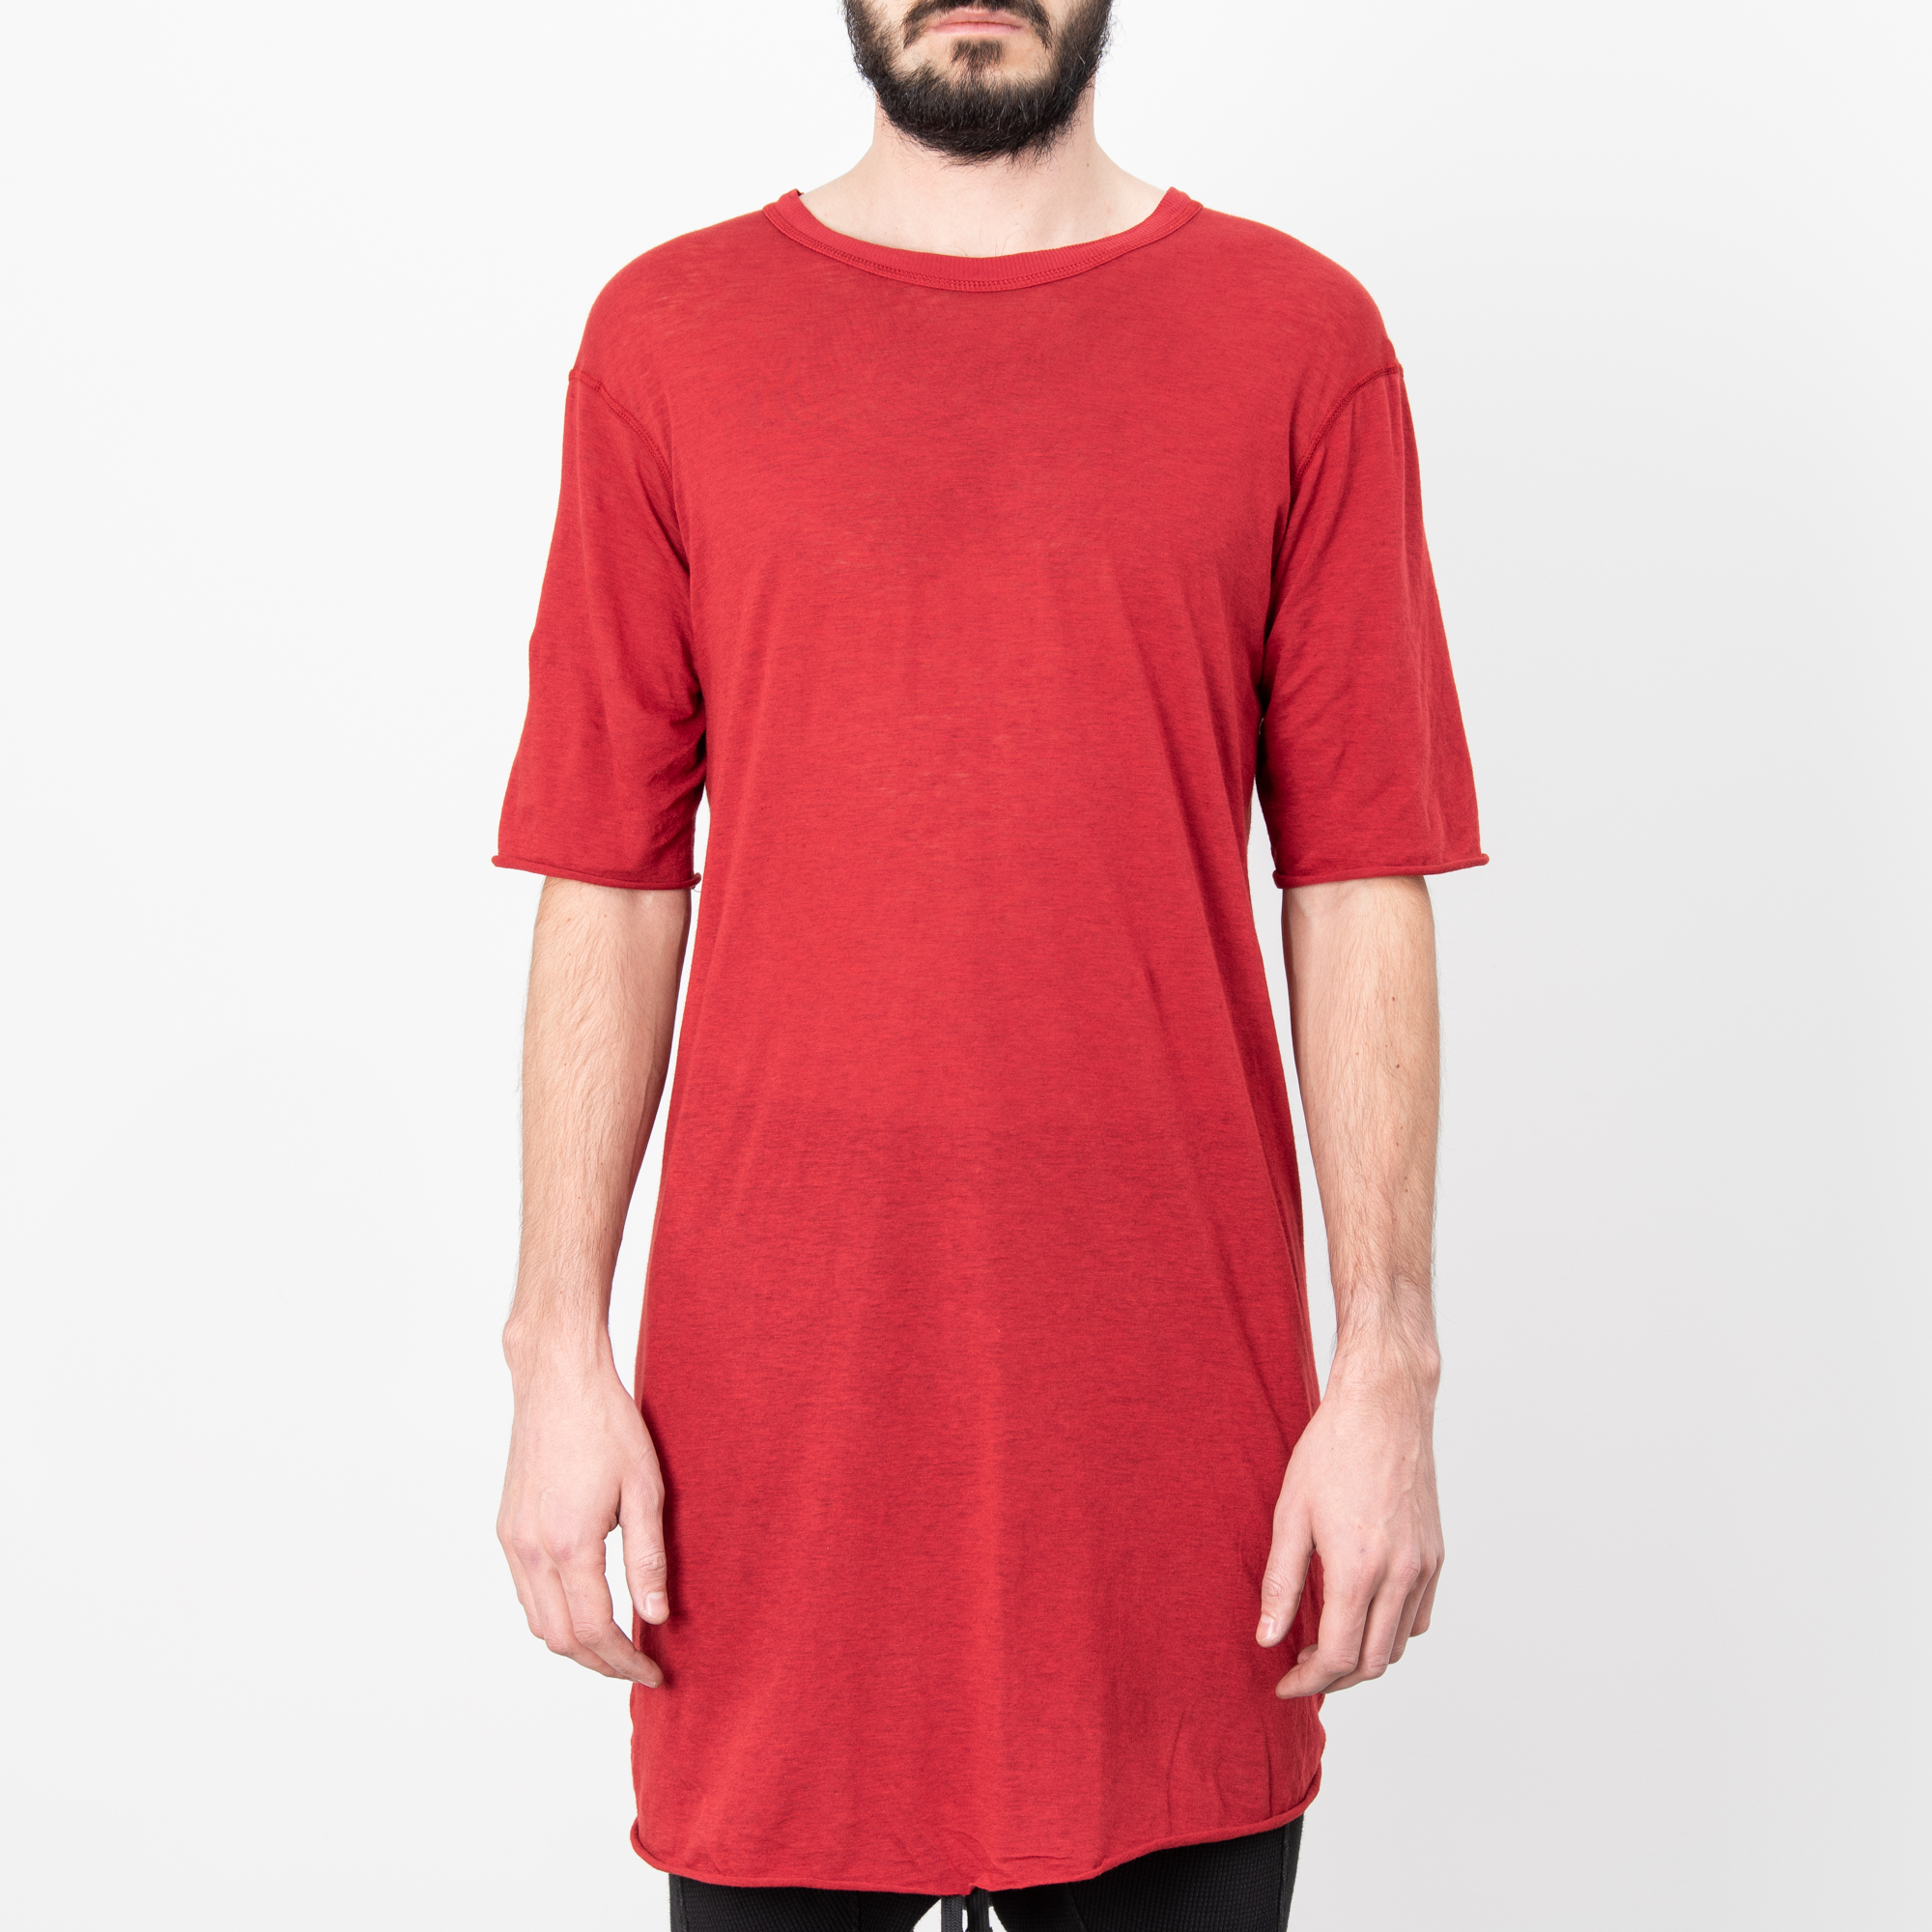 BLOOD RED TS1 TF T-SHIRT|wolfensson